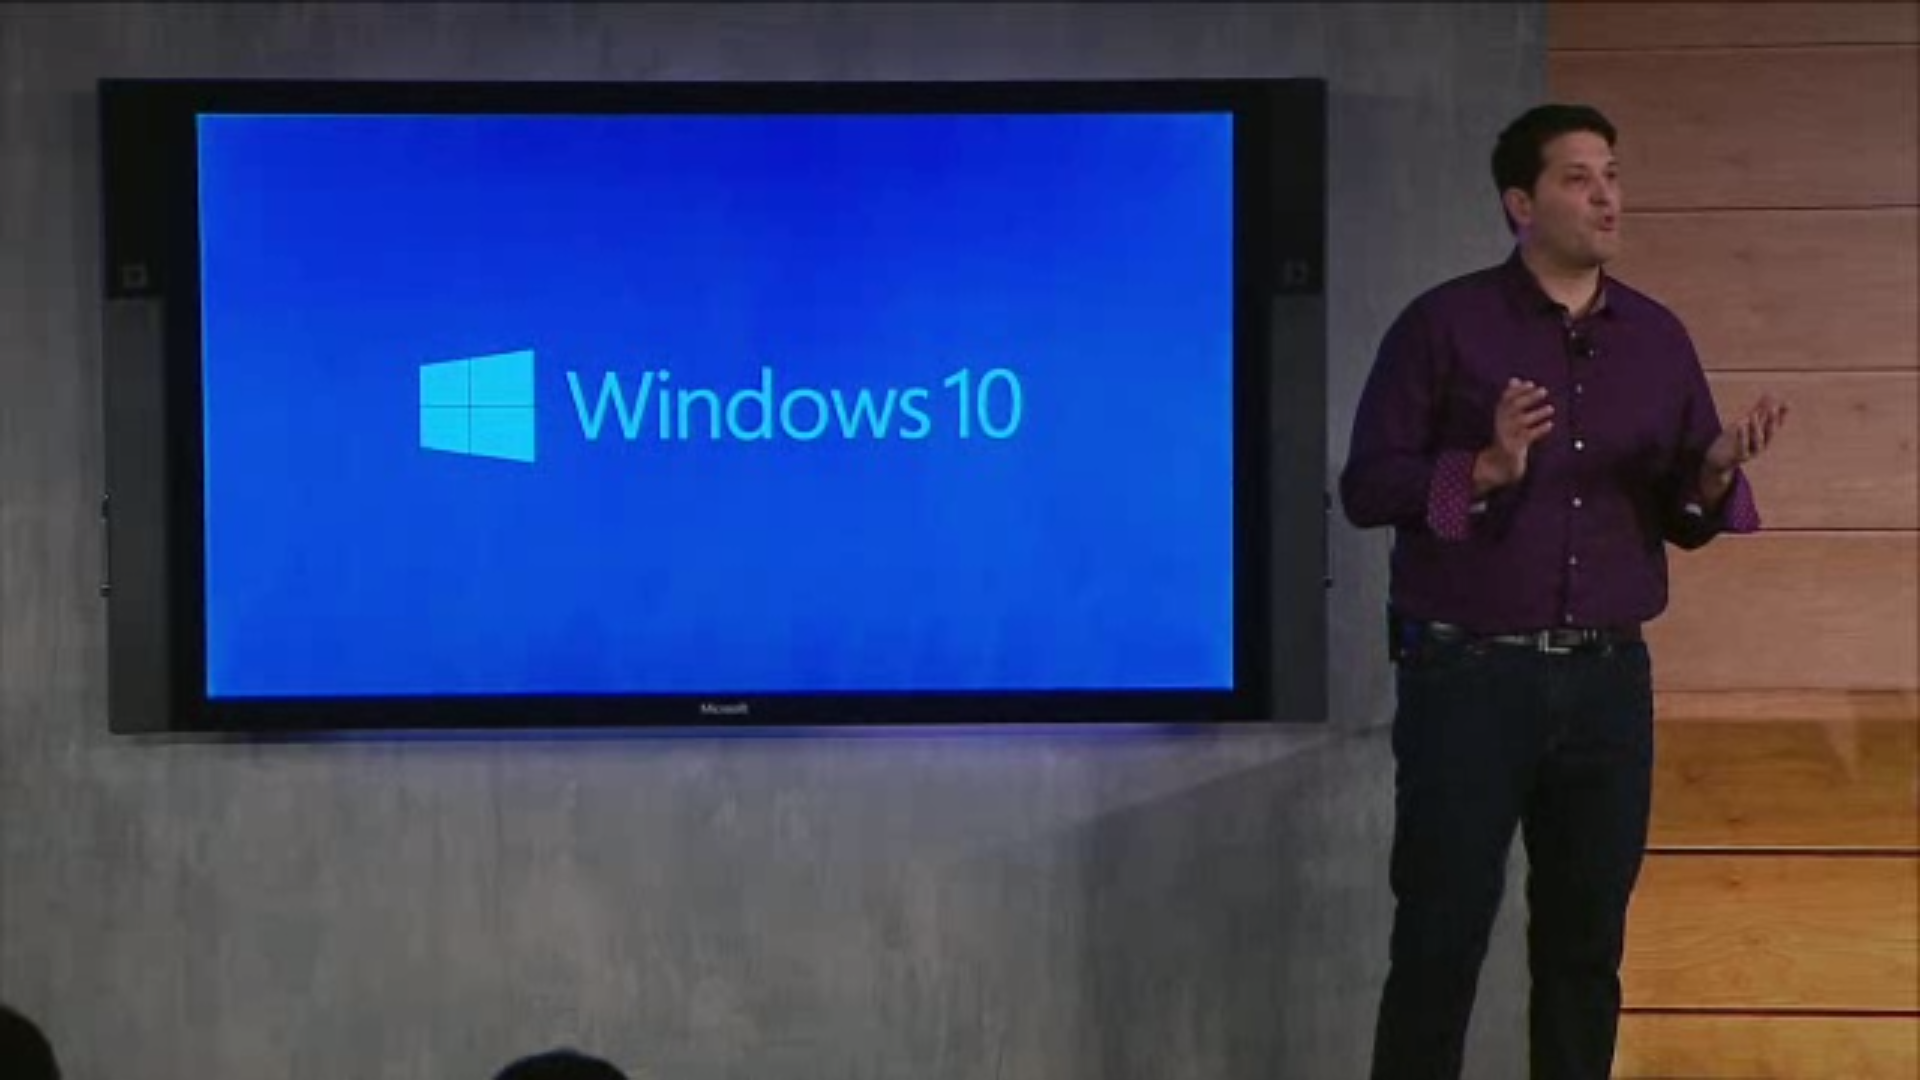 Windows 10 to launch this summer and in 190 countries